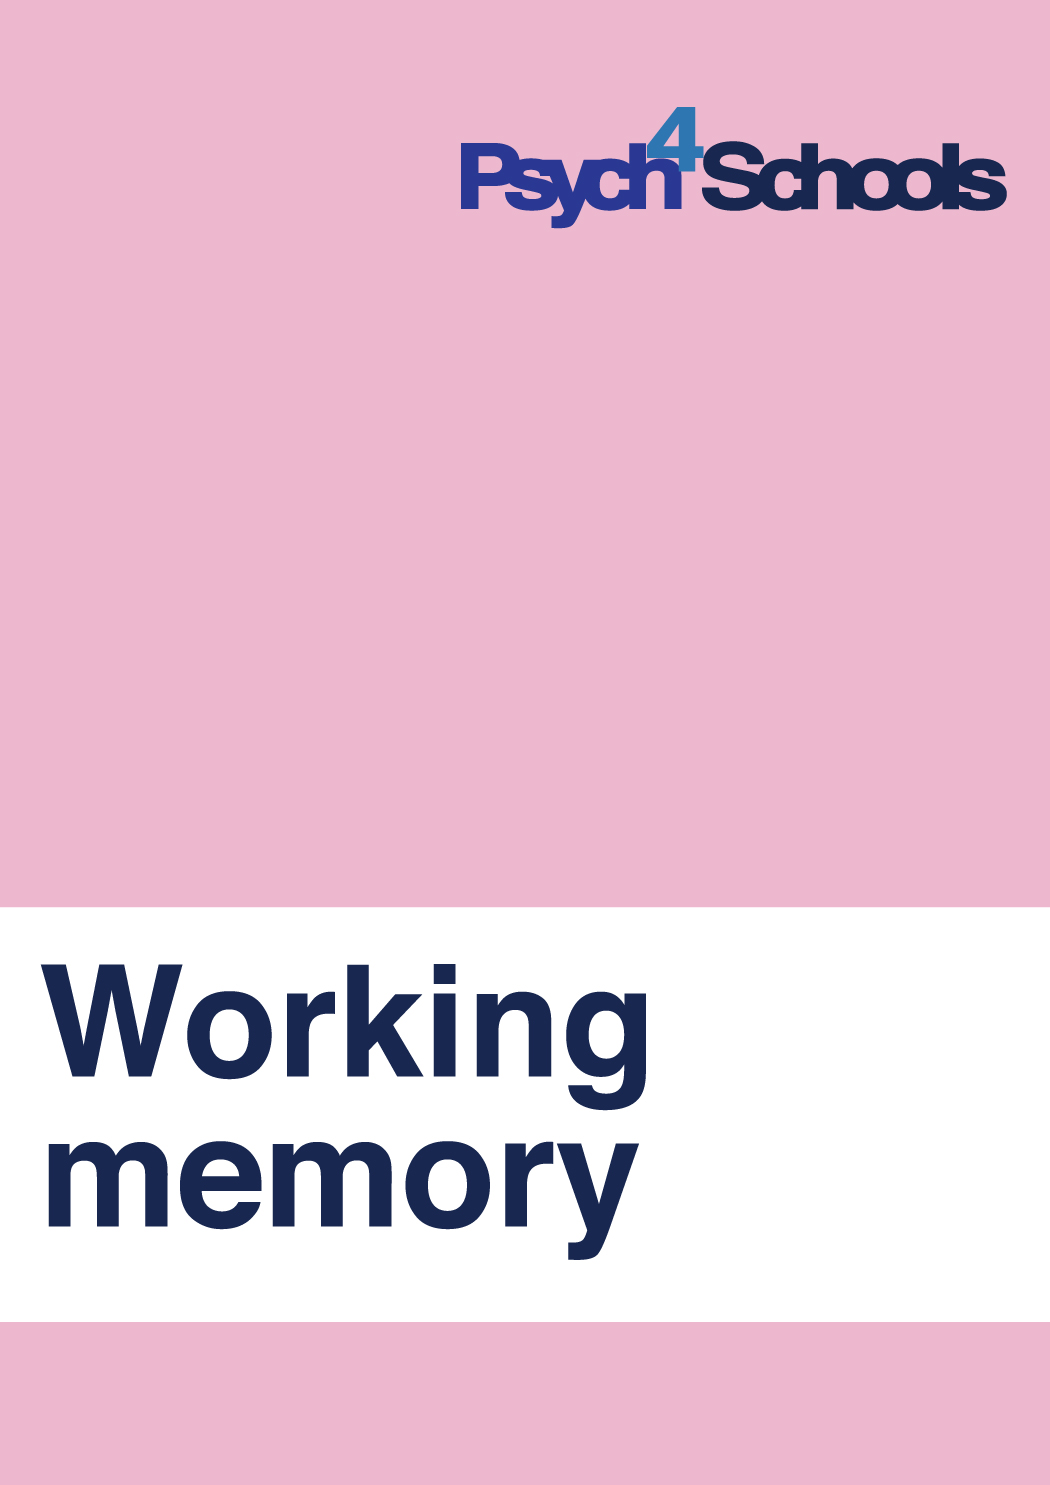 Working memory difficulties